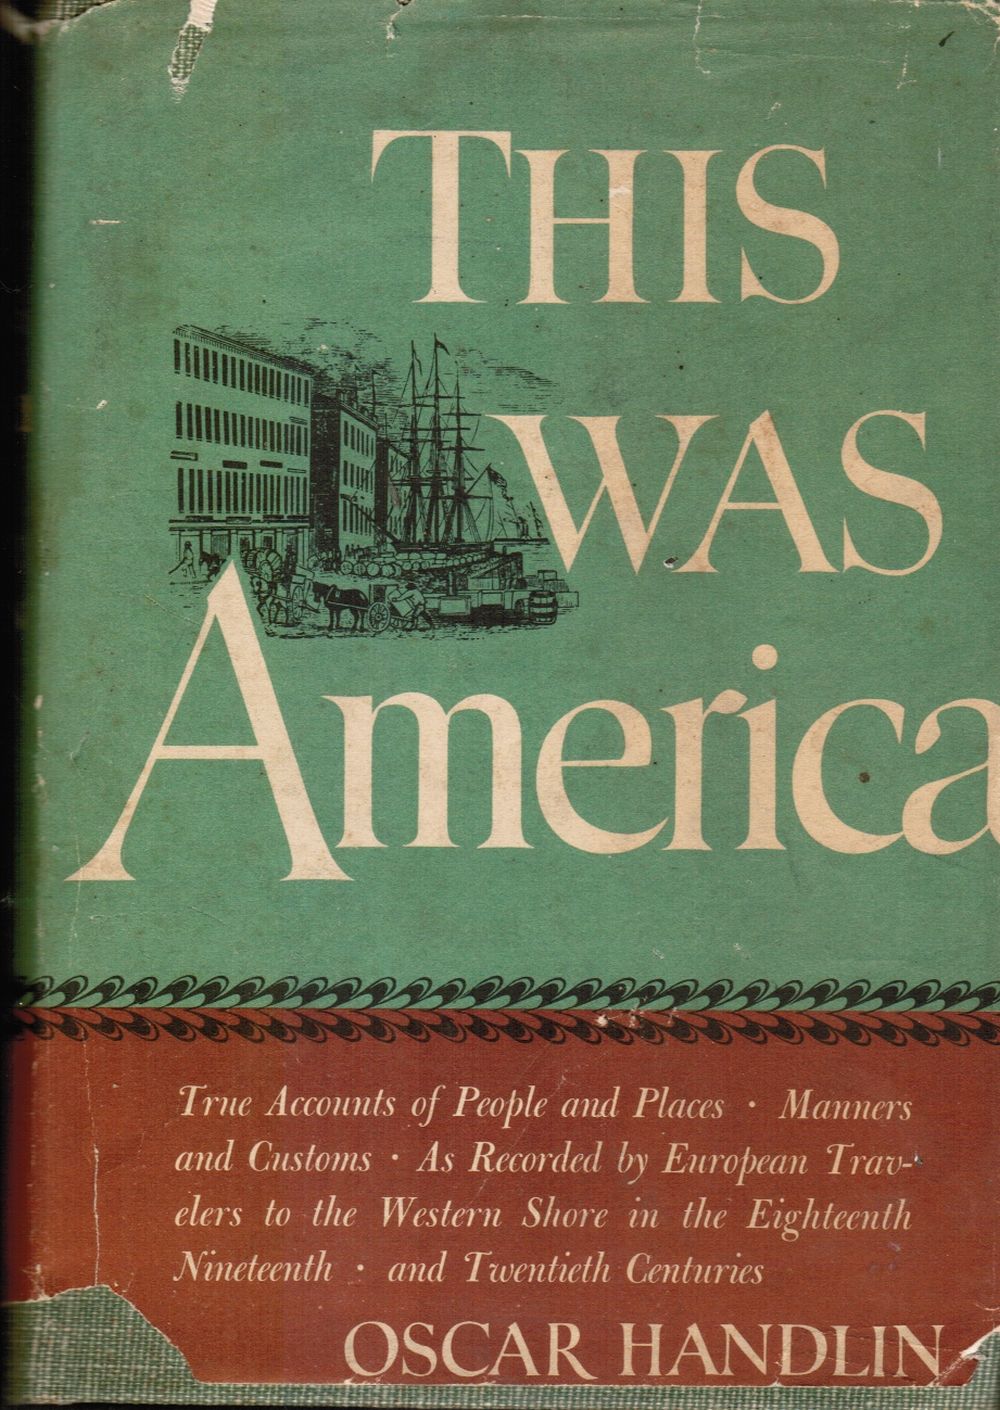 HANDLIN, OSCAR - This Was America: True Accounts of People and Places, Manners and Customs